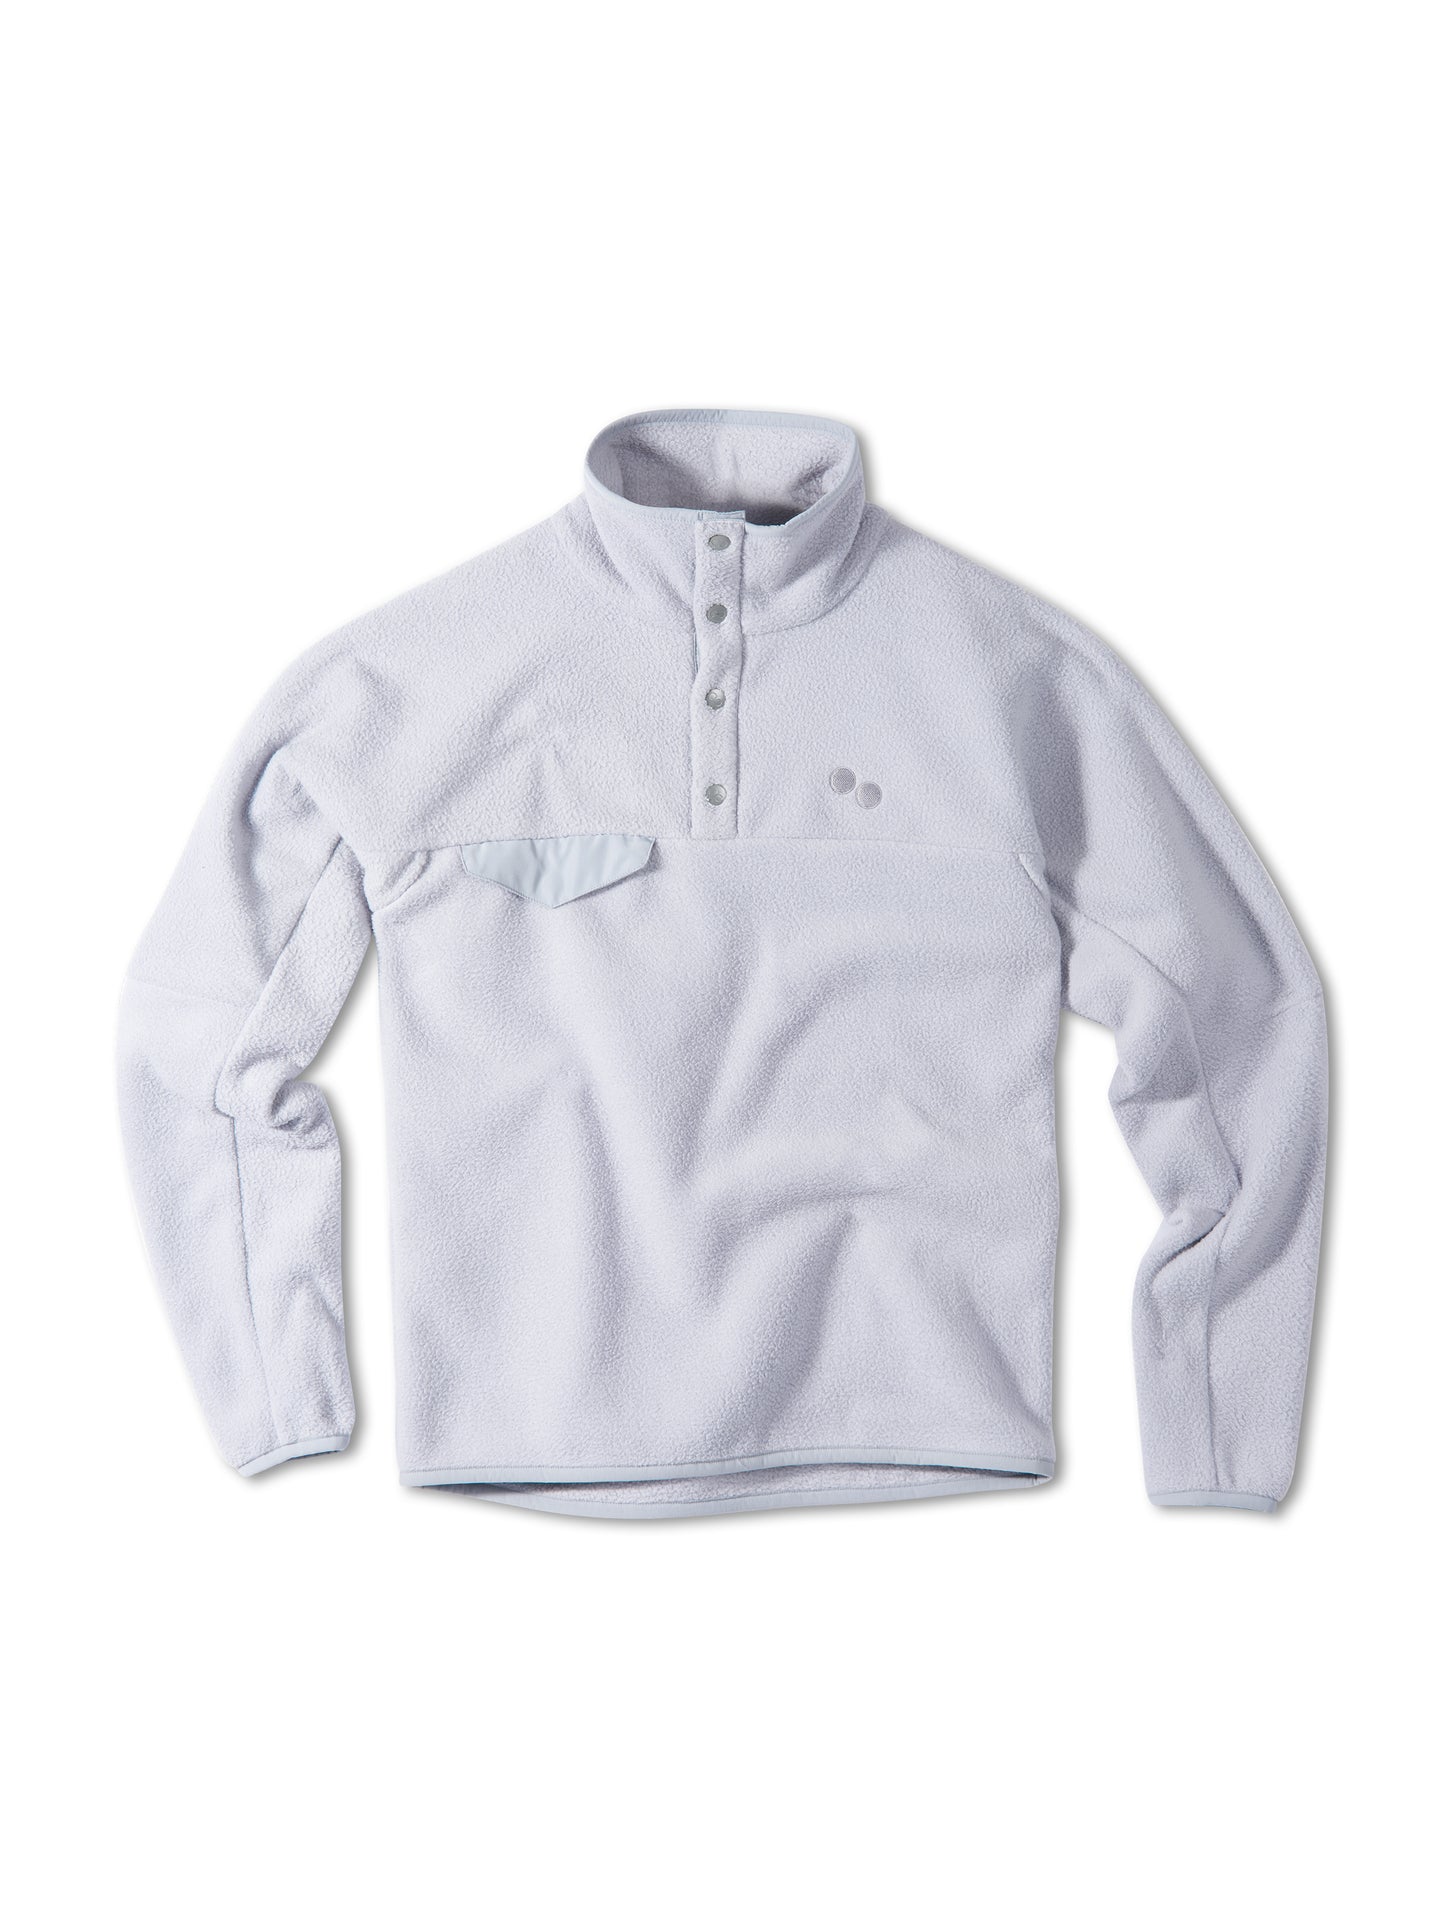 pinqponq-Fleece-Pullover-Iced-Grey-front